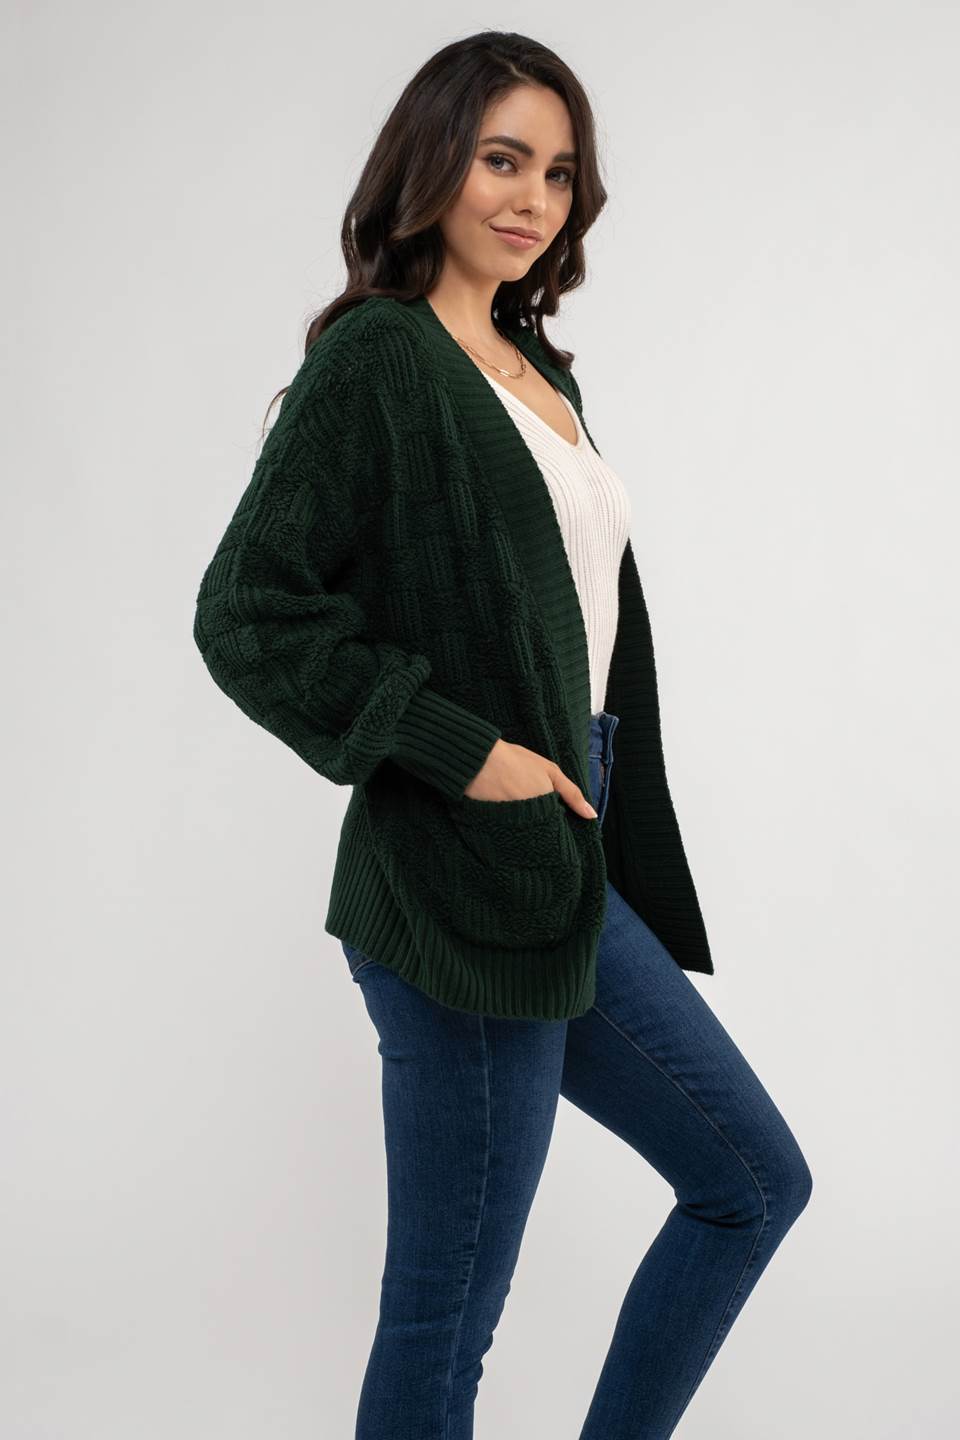 CHECKERED TEXTURED KNIT CARDIGAN